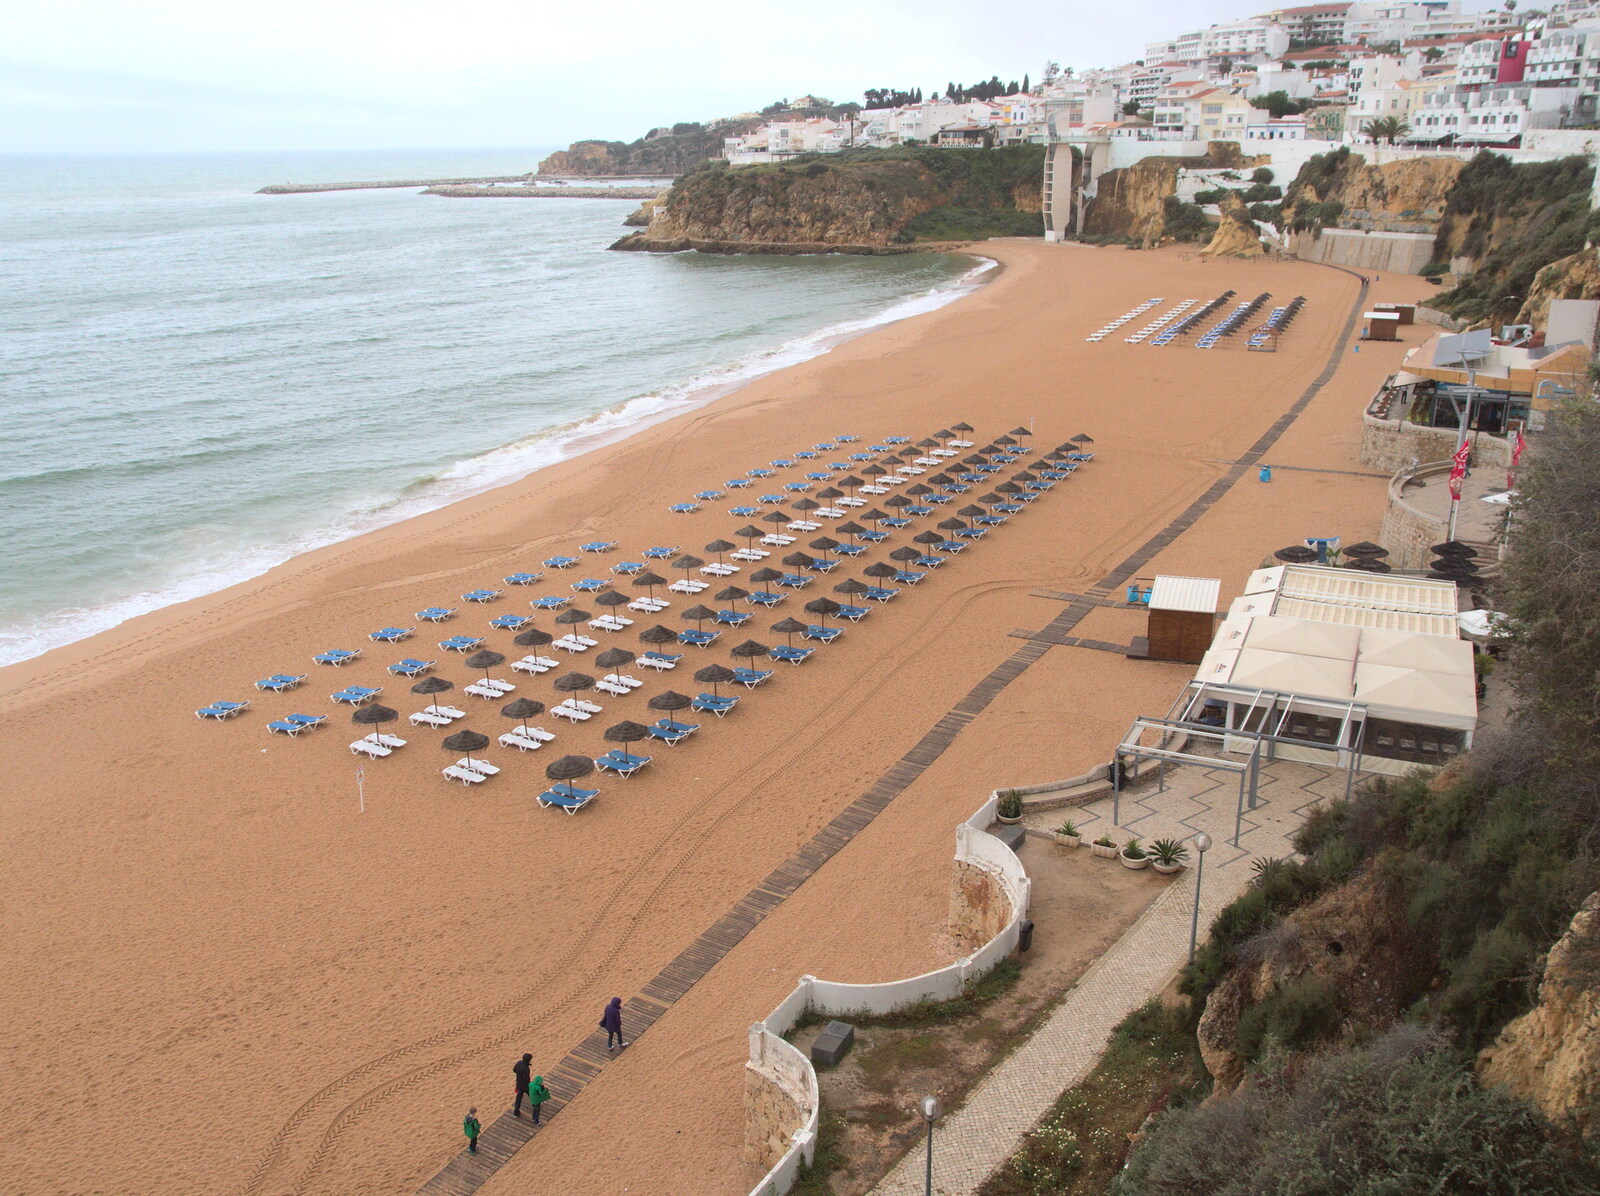 The beach is mostly deserted from A Trip to Albufeira: The Hotel Paraiso, Portugal - 3rd April 2016